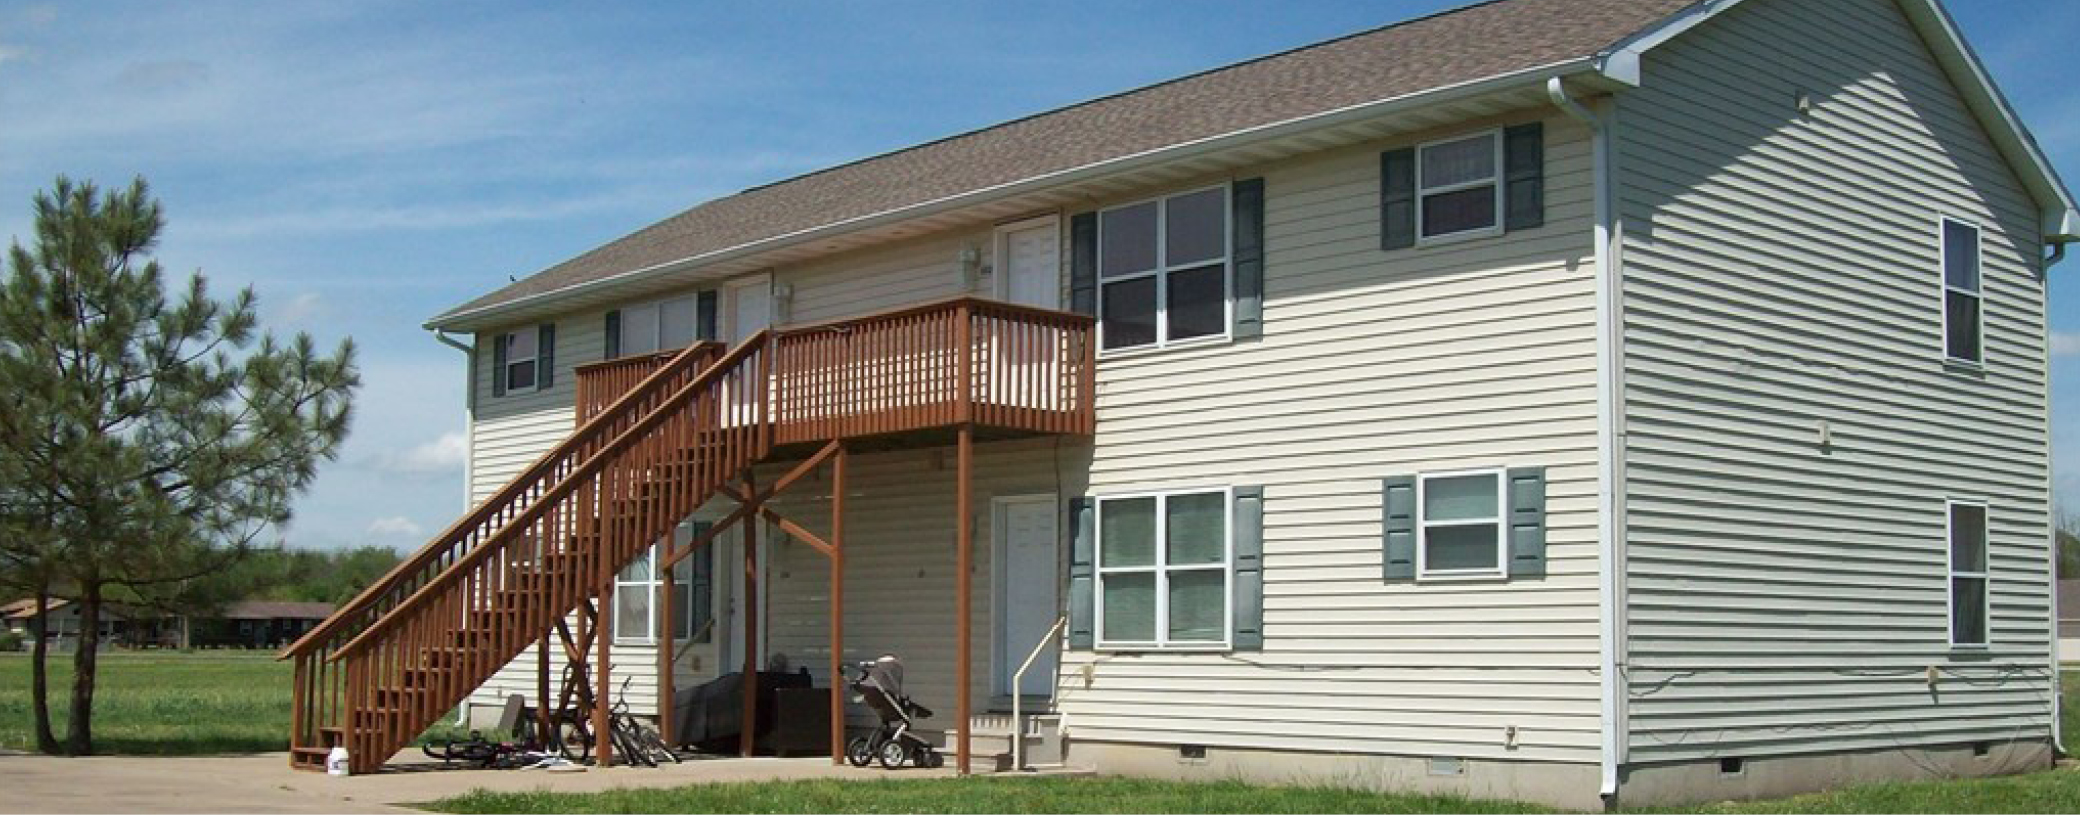 Two-story multifamily building with beige siding and wooden staircases leading to upper-level units, set against a backdrop of clear skies and greenery.